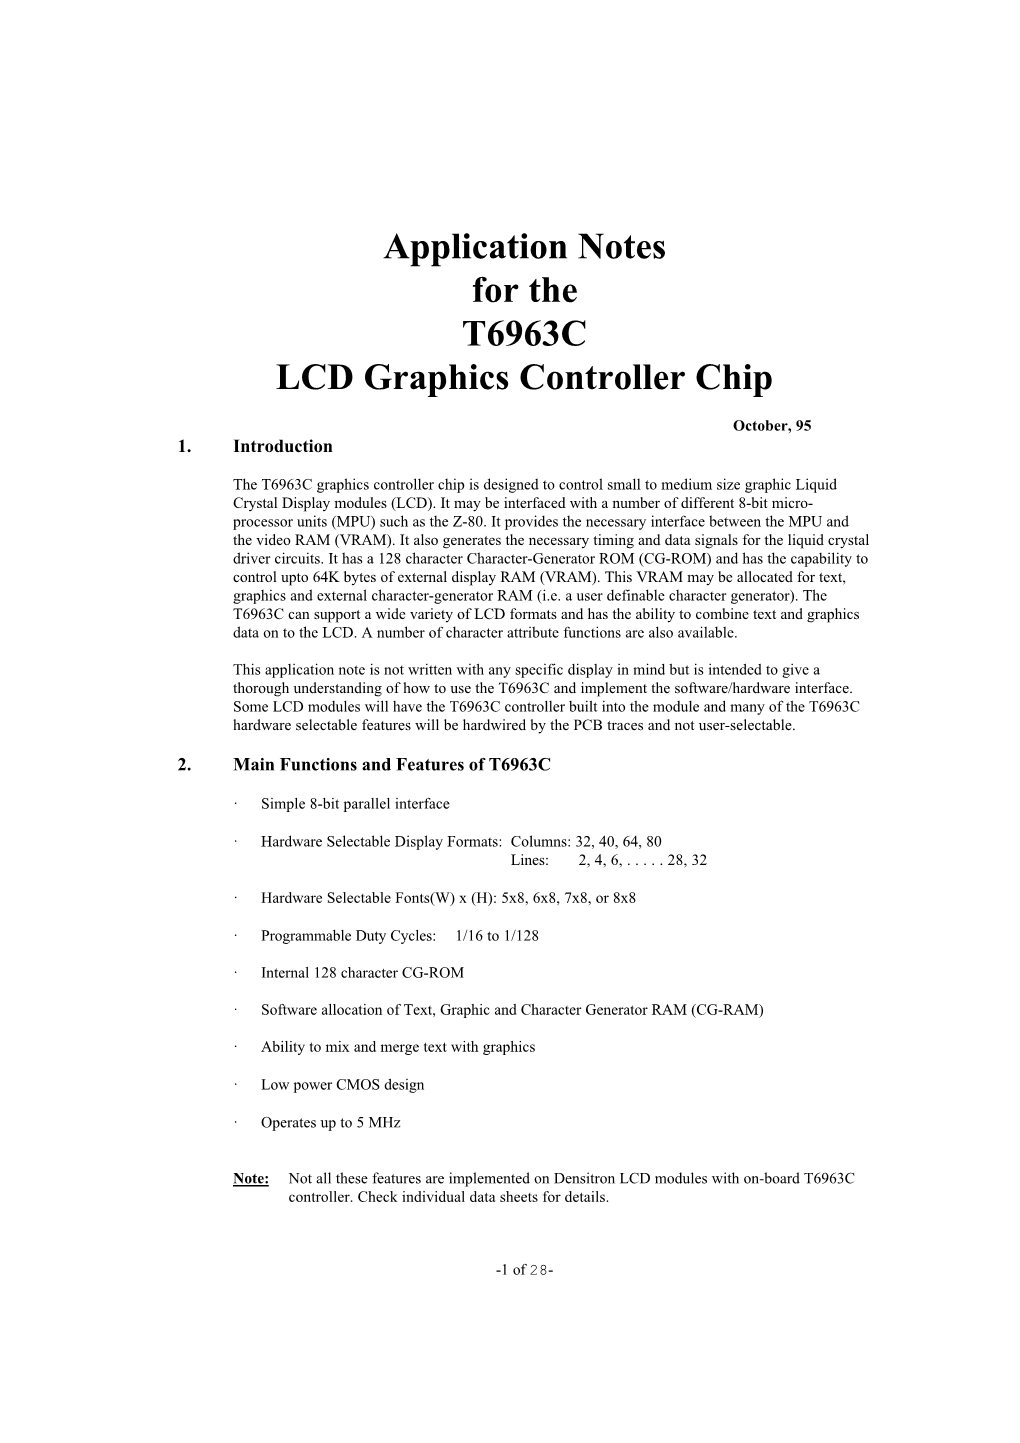 Application Notes for the T6963C LCD Graphics Controller Chip